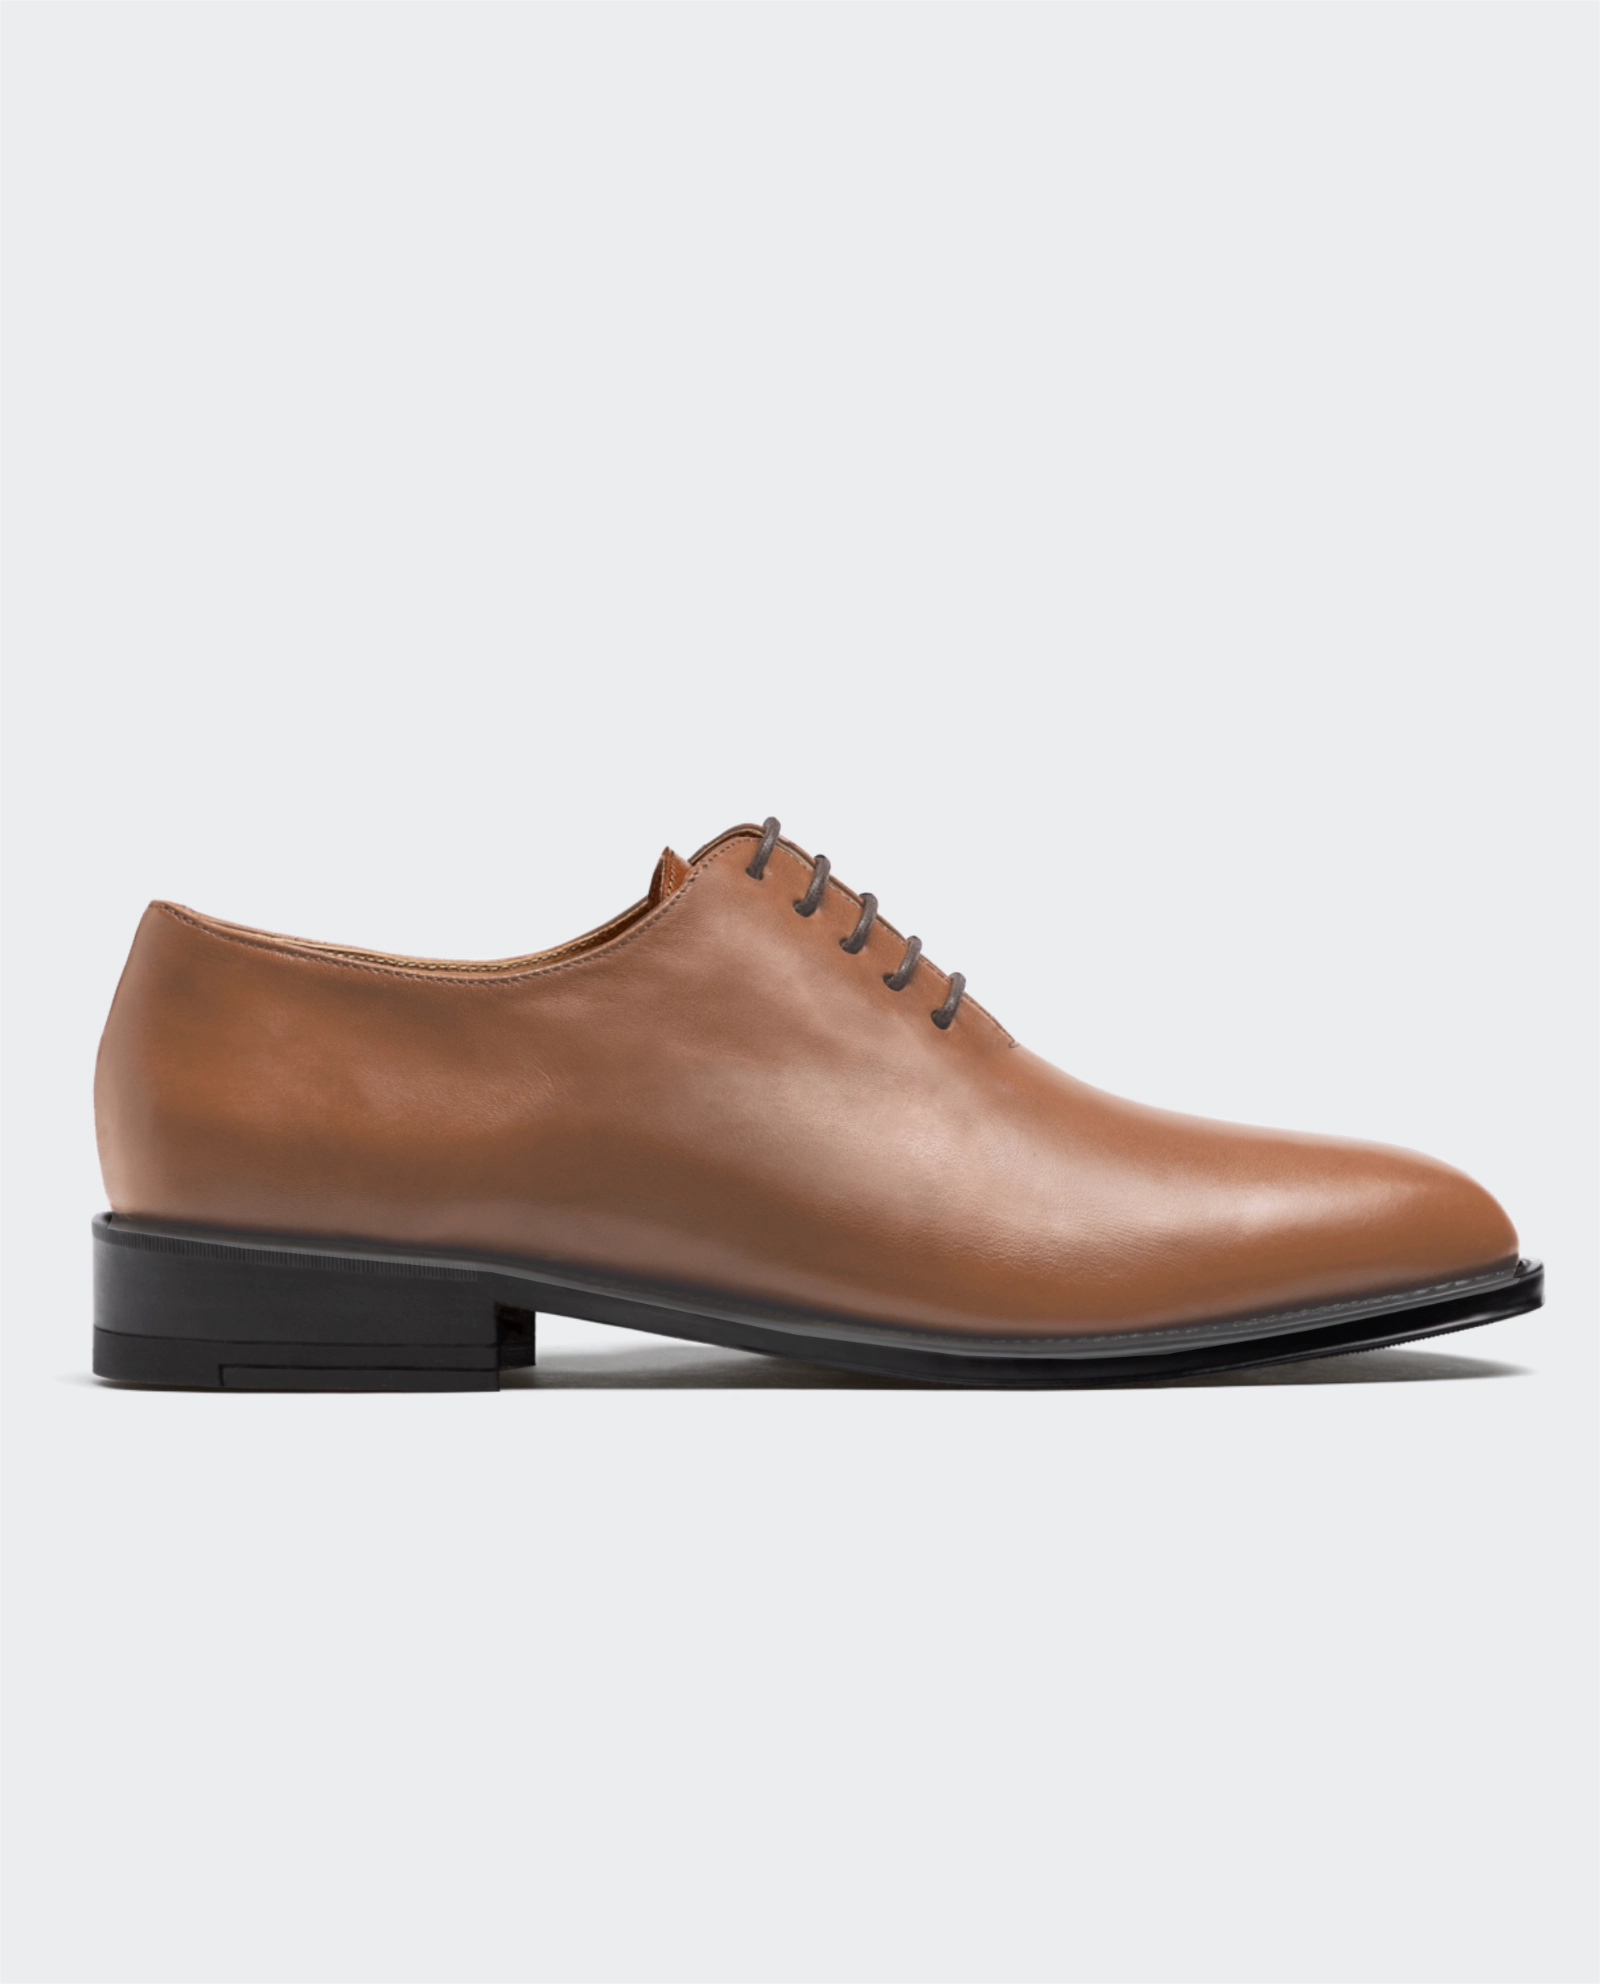 Chukka boots and dress shoes Shoelace Length